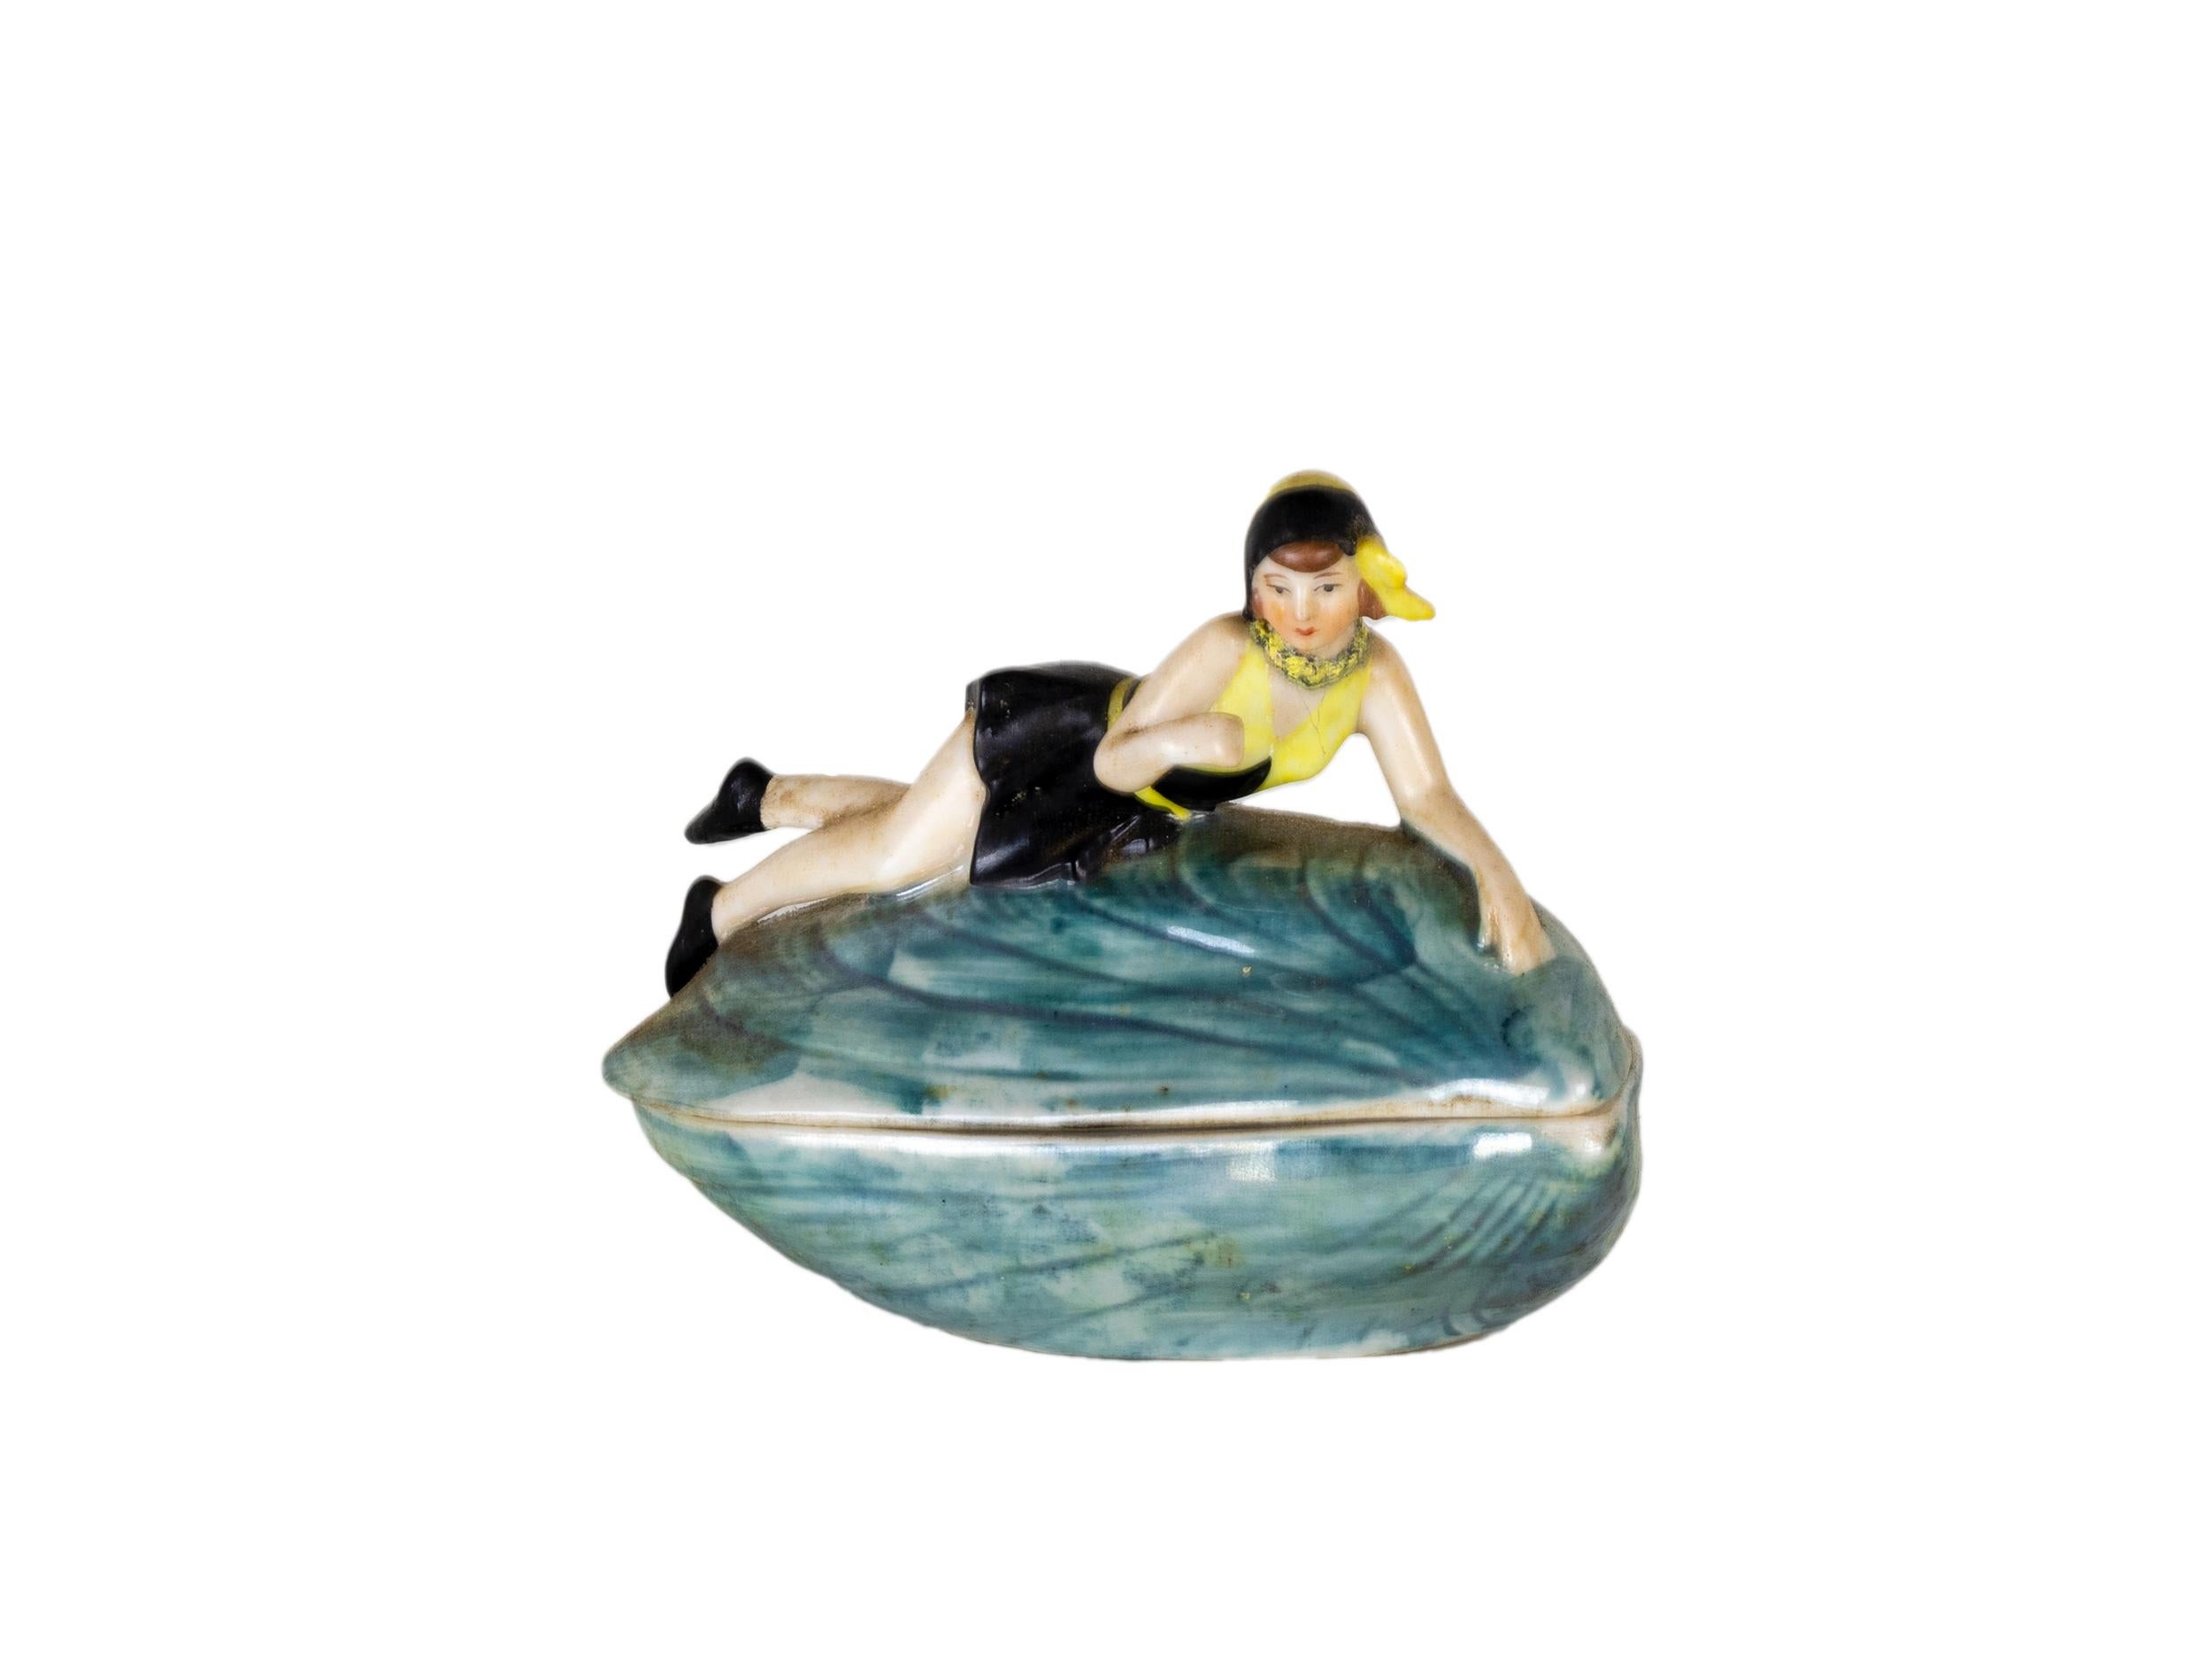 A nacre color Mussel Shell Rice Powder Box figurine in porcelain of a bathing lady in shell / Pin Up girl -style Baigneuse / Petite baigneuse.

10392 marked on the piece.
by W Goebel of Rodental Bavaria
